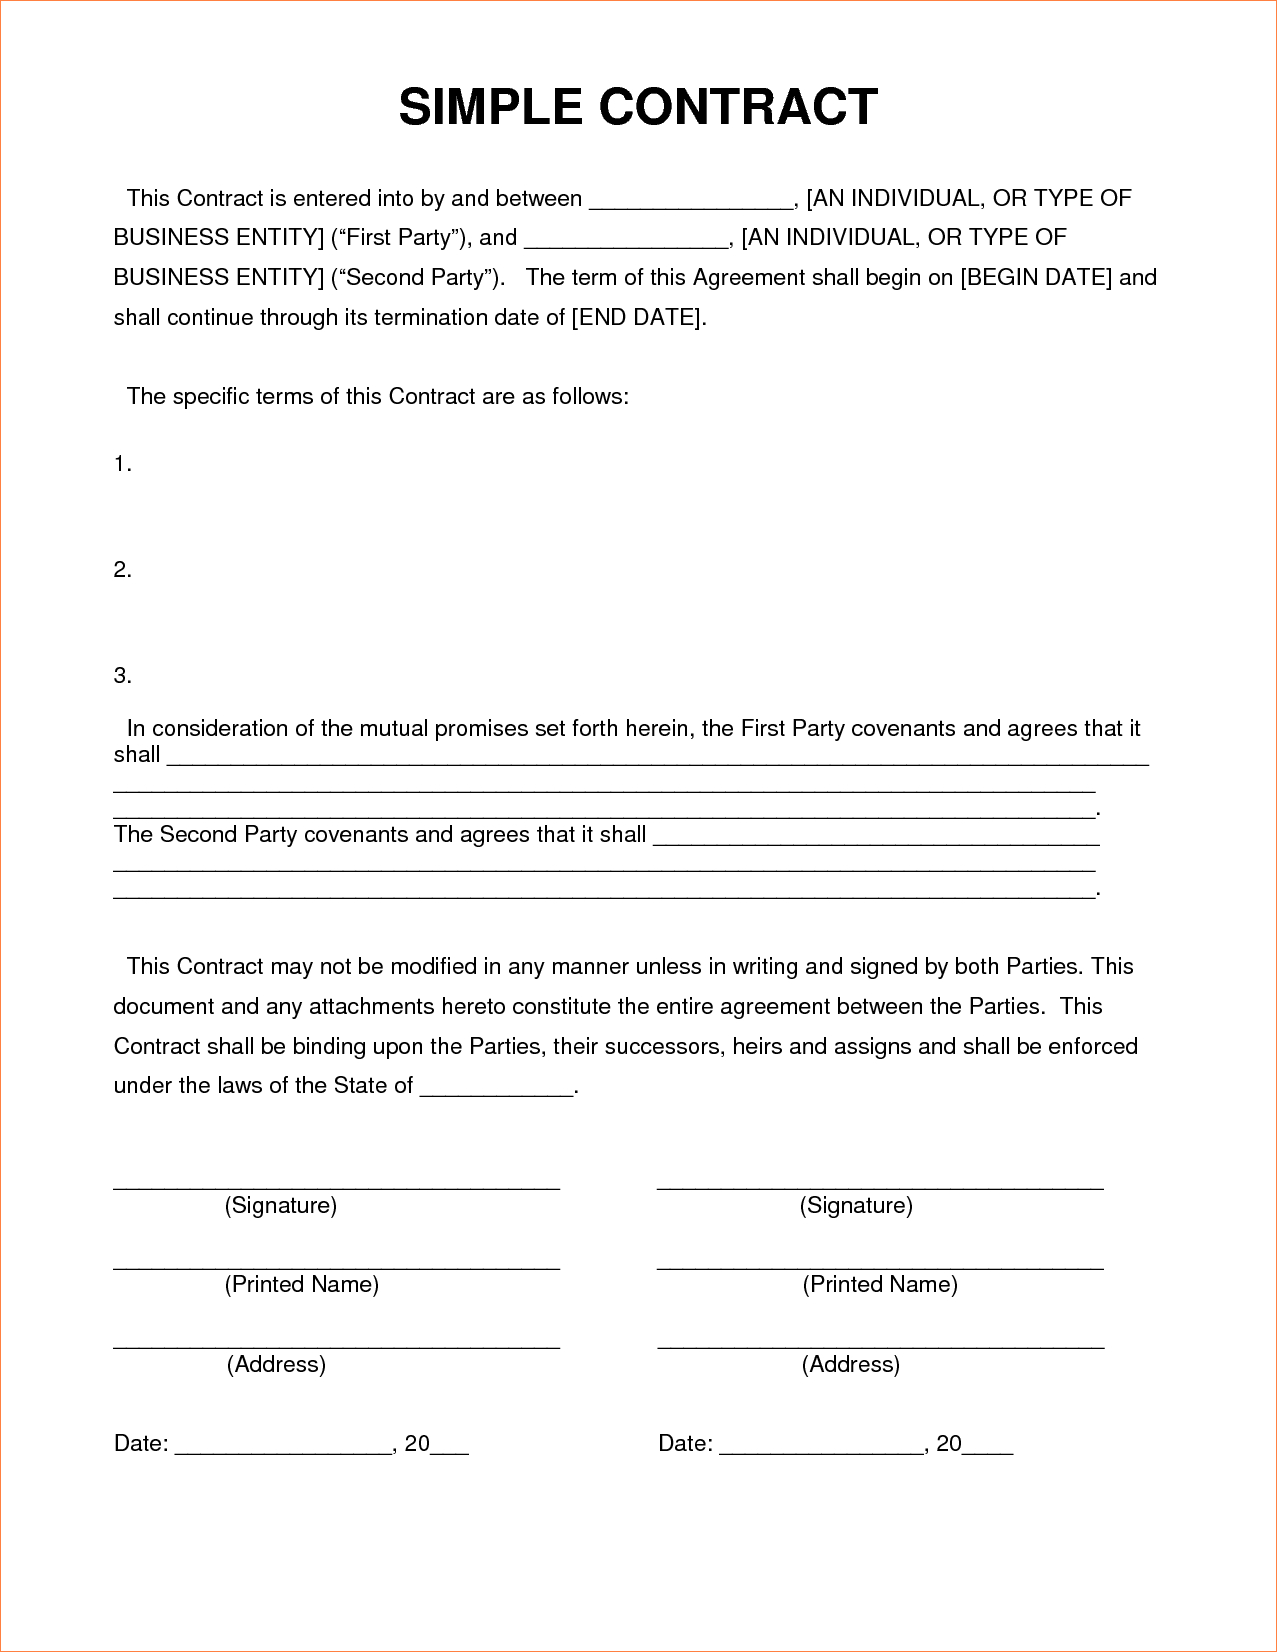 simple-construction-contract-form-kaza-psstech-co-free-printable